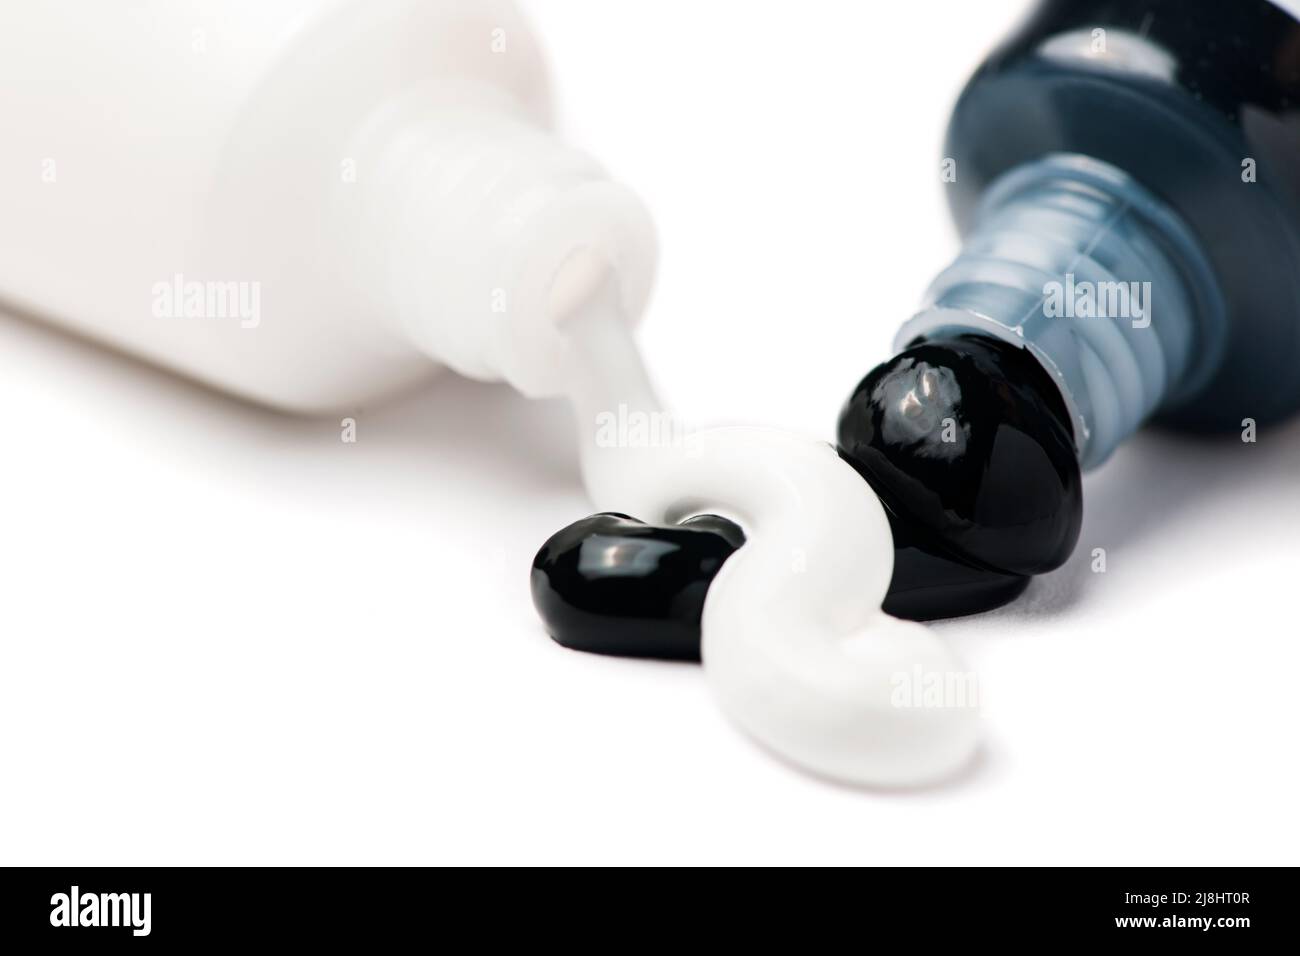 Close-up of two open tubes of artist paint with black and white acrylic paint pouring out on a white background. Stock Photo